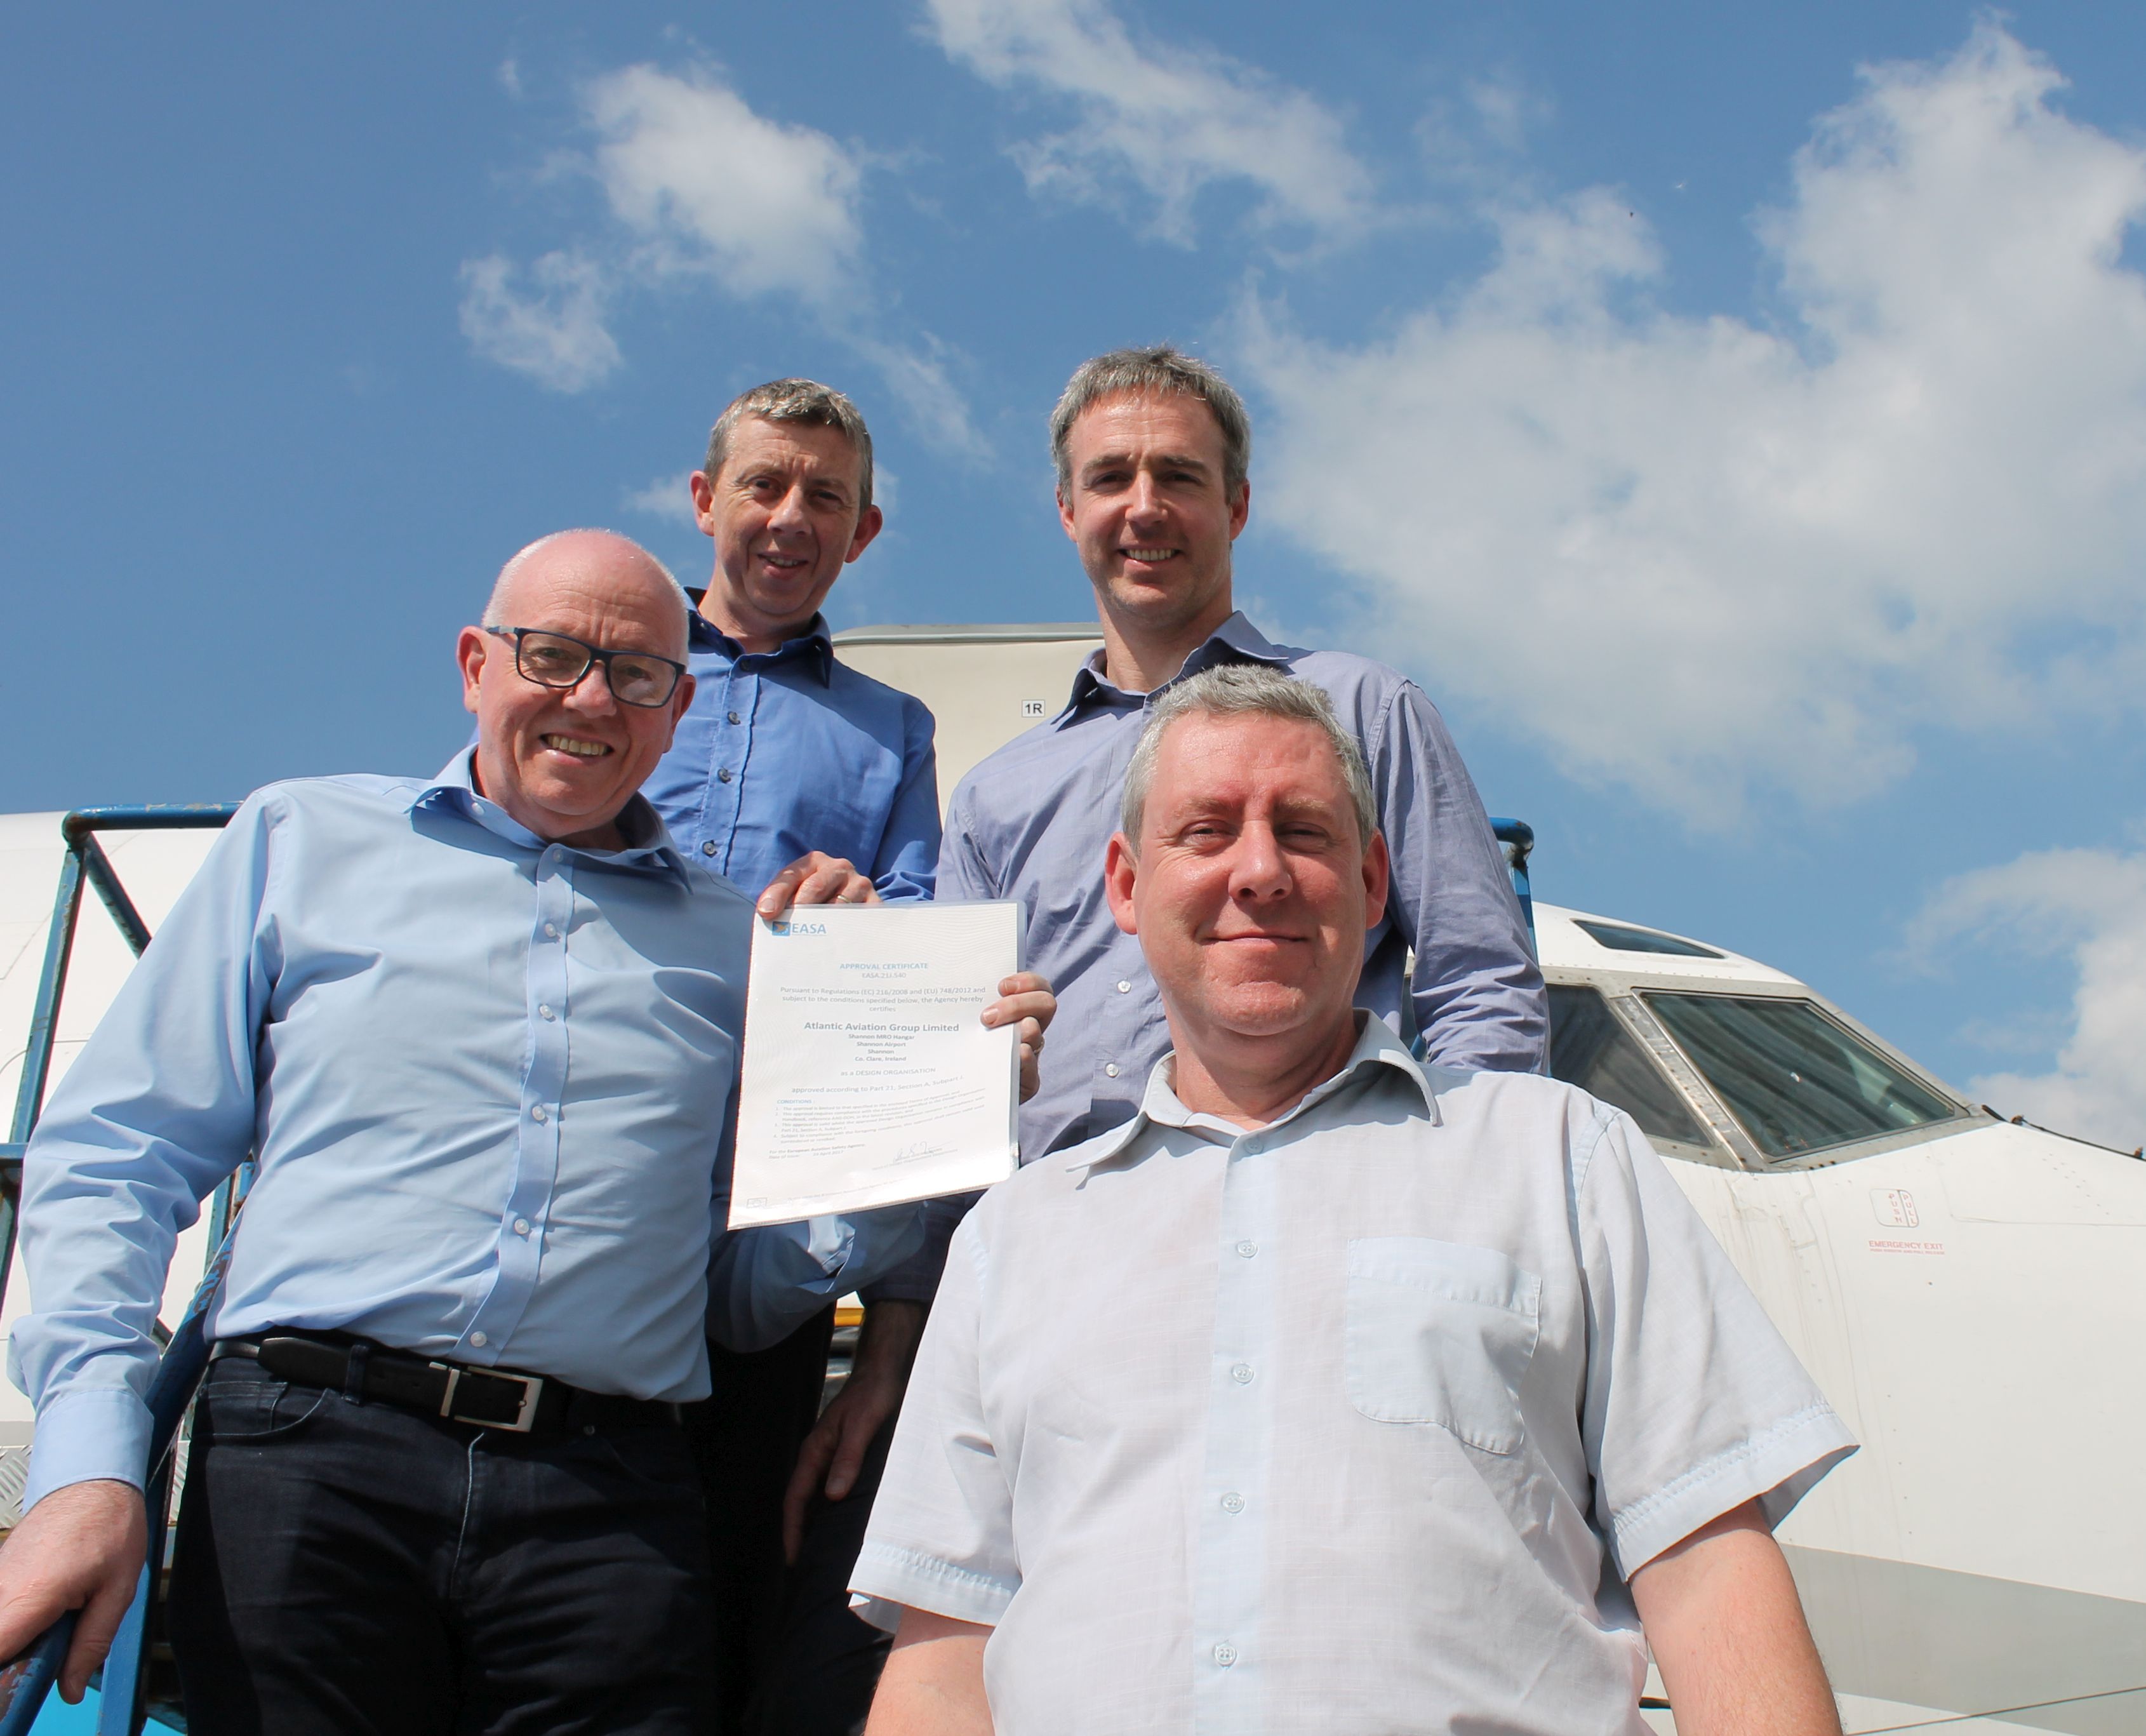 Head of Airworthiness Nick Holdaway, Quality Manager Joe Martin, Design Services Manager Colm Carty and Quality Assurance Inspector Brian Loftus at the announcement of Design services approval for Atlantic Aviation Group.